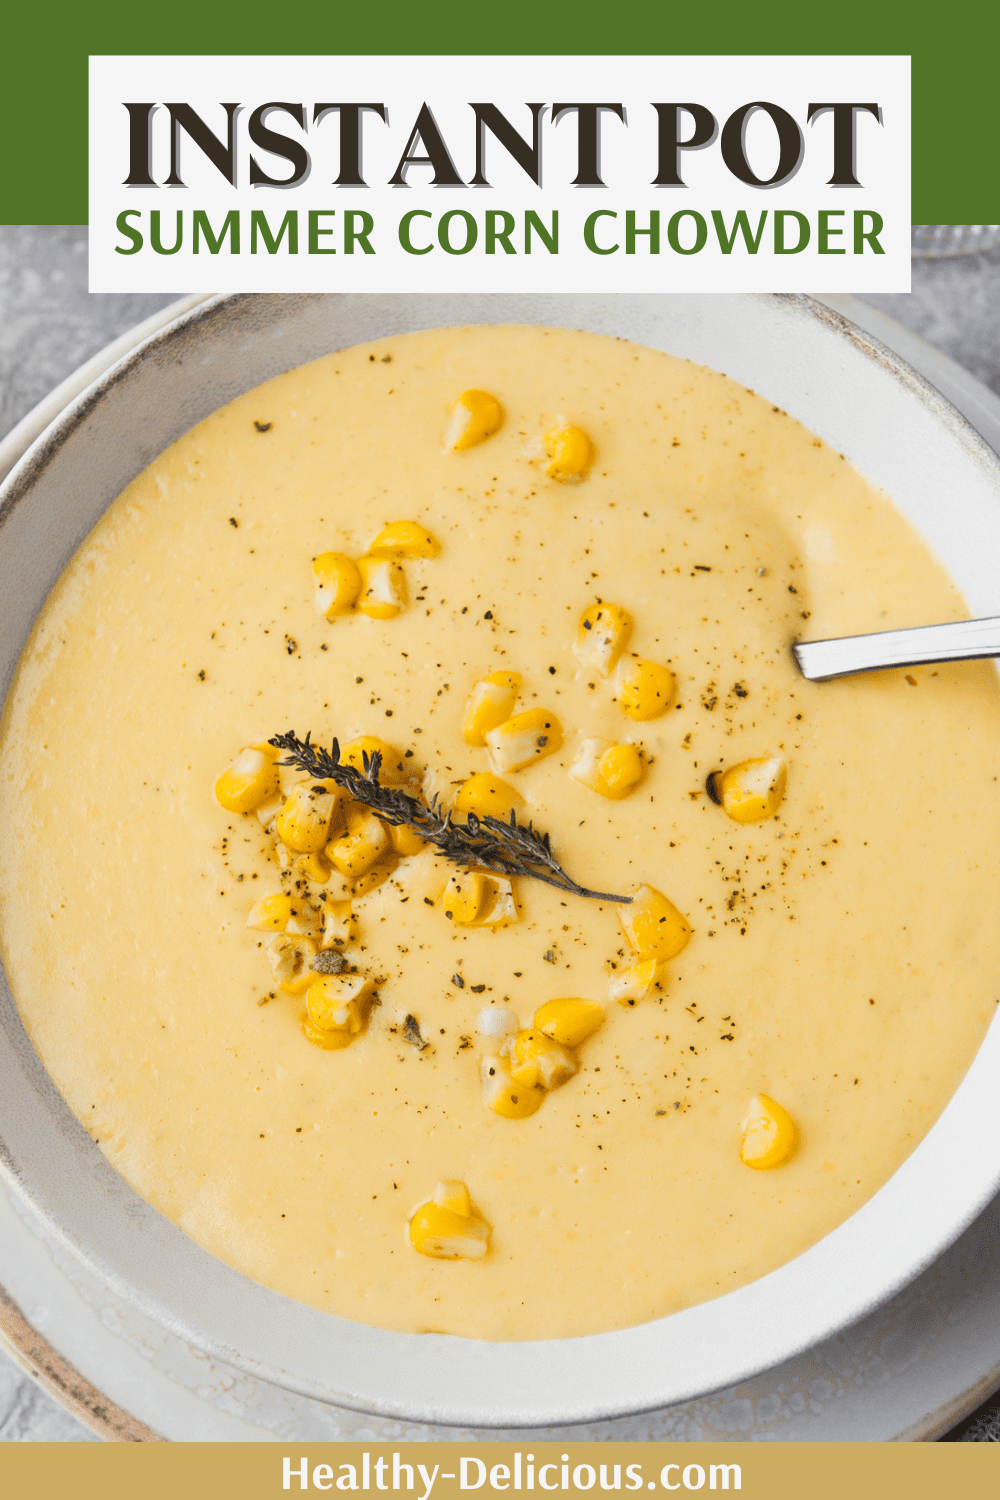 This silky smooth potato and corn chowder highlights the flavor of sweet summer corn. Make it in your Instant Pot in under 40 minutes, or cook it in your crockpot/ slow cooker. This easy recipe is vegetarian and gluten-free. via @HealthyDelish